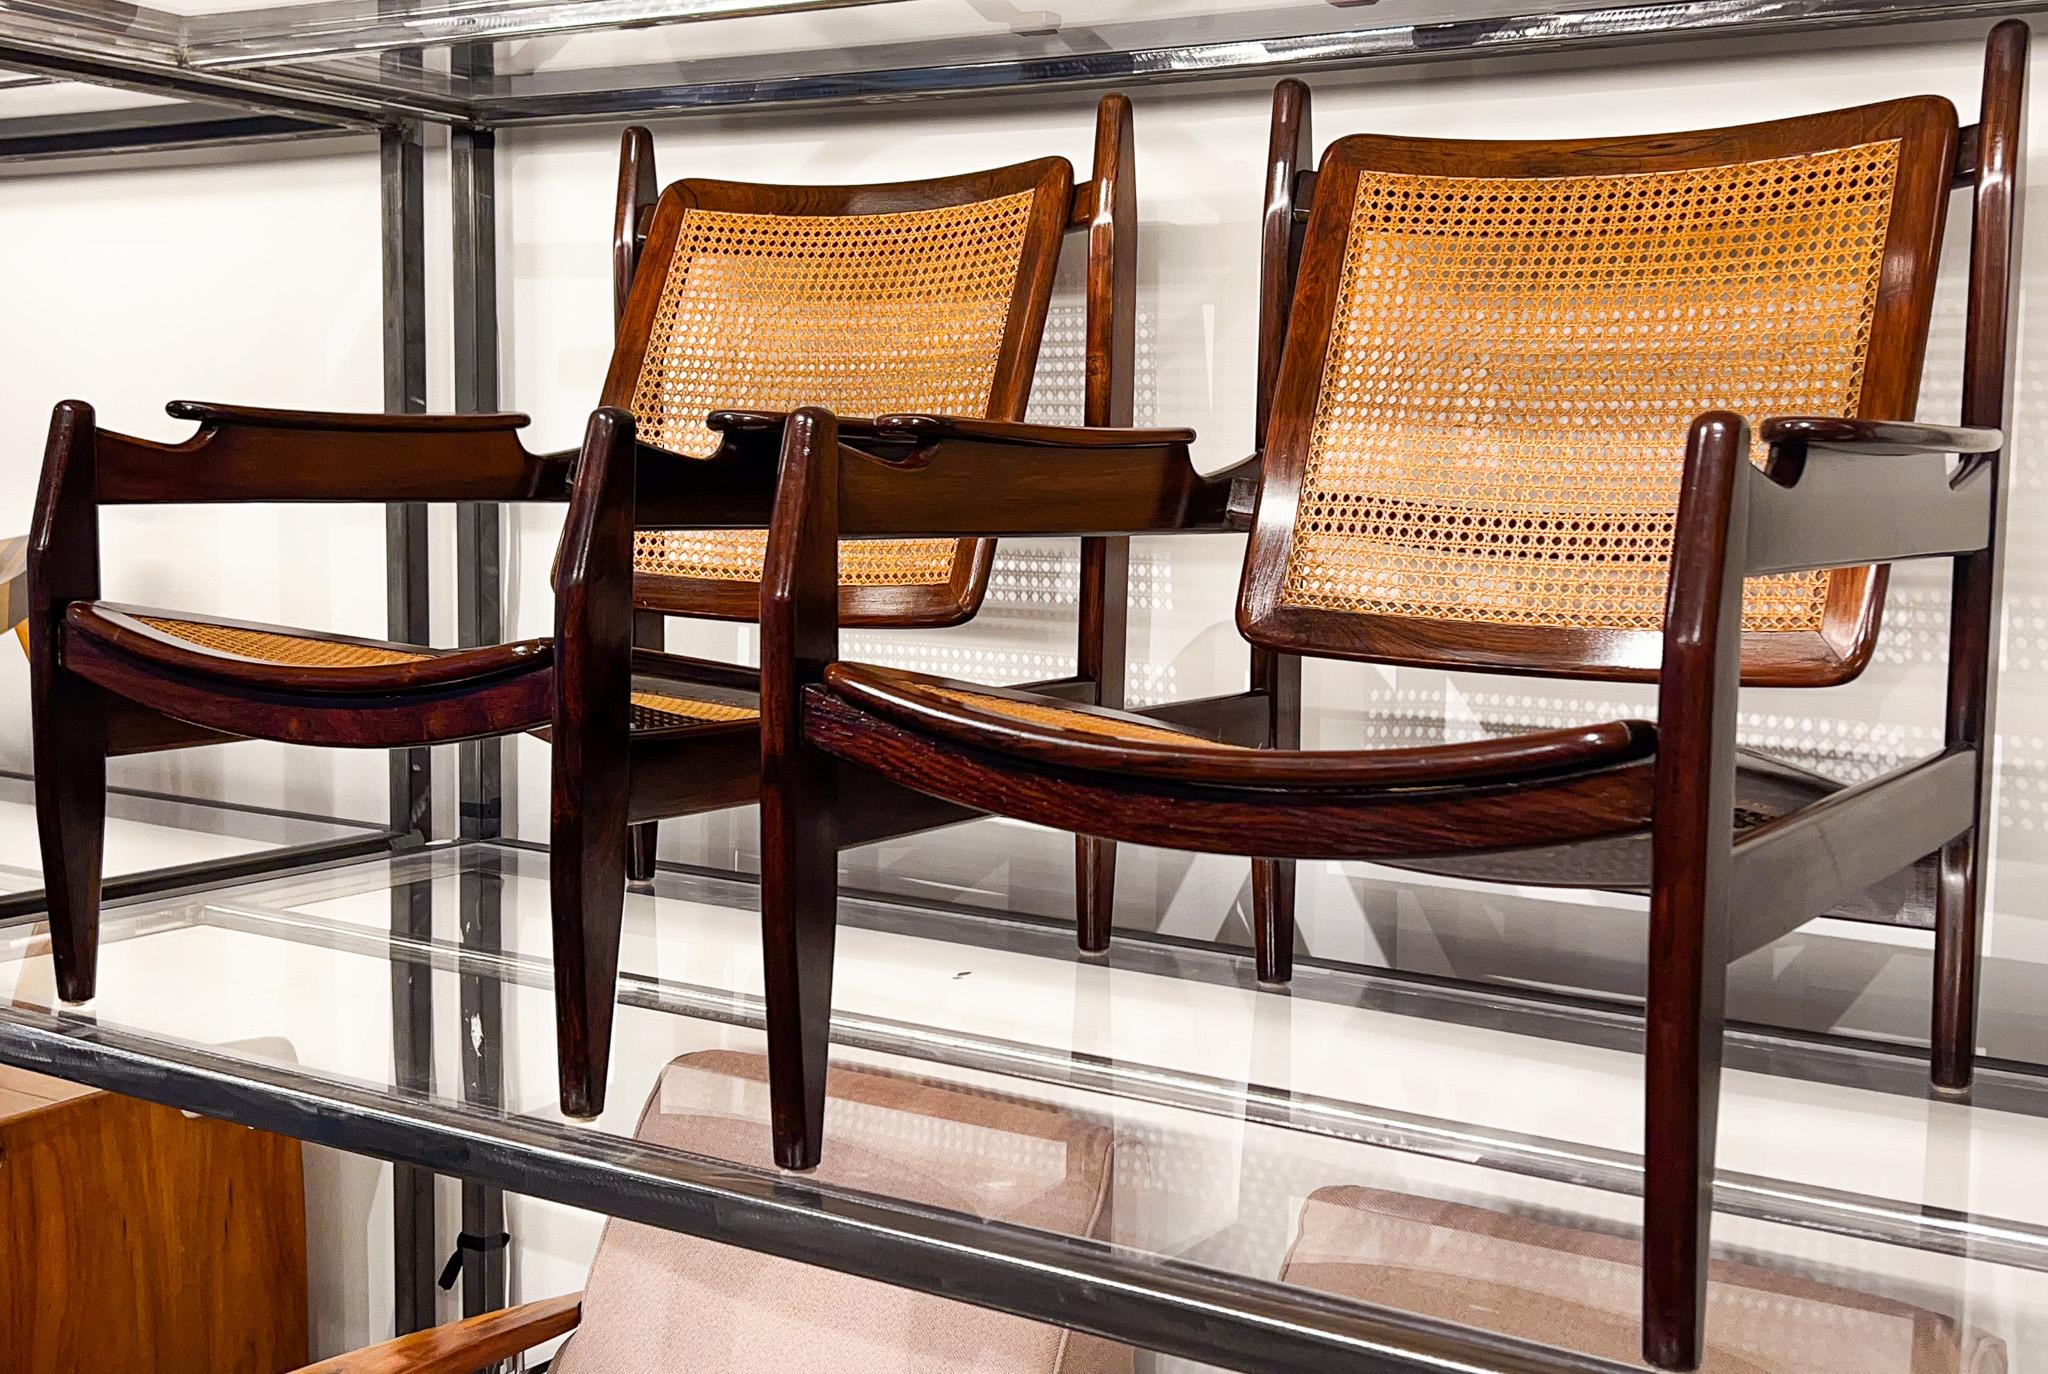 Brazilian Pair of Armchairs in Hardwood and Cane by Alexandre Rapoport, c. 1960s